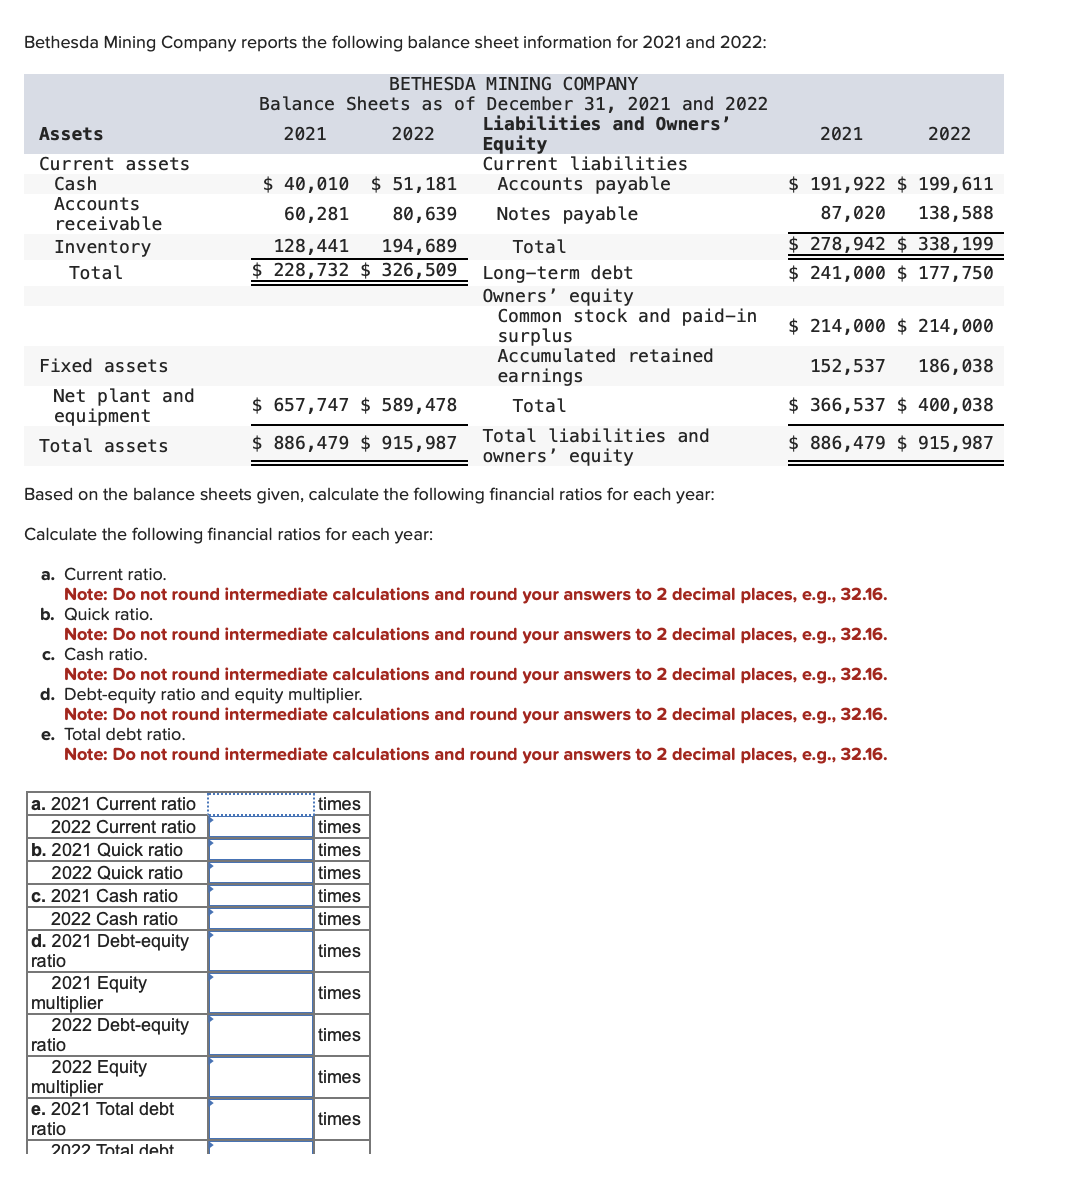 Bethesda Mining Company reports the following balance sheet information for 2021 and 2022:
BETHESDA MINING COMPANY
Balance Sheets as of December 31, 2021 and 2022
Liabilities and Owners'
2021
2022
Assets
Current assets
Cash
Accounts
receivable
Inventory
Total
Fixed assets
Net plant and
equipment
Total assets
Total liabilities and
owners' equity
Based on the balance sheets given, calculate the following financial ratios for each year:
Calculate the following financial ratios for each year:
a. 2021 Current ratio
2022 Current ratio
b. 2021 Quick ratio
2022 Quick ratio
c. 2021 Cash ratio
2022 Cash ratio
d. 2021 Debt-equity
ratio
2021 Equity
multiplier
2022 Debt-equity
ratio
$ 40,010 $ 51,181
60, 281
80,639
128,441
194, 689
$ 228,732 $ 326,509
a. Current ratio.
Note: Do not round intermediate calculations and round your answers to 2 decimal places, e.g., 32.16.
b. Quick ratio.
2022 Equity
$ 657,747 $ 589,478
$886,479 $ 915,987
Note: Do not round intermediate calculations and round your answers to 2 decimal places, e.g., 32.16.
c. Cash ratio.
Note: Do not round intermediate calculations and round your answers to 2 decimal places, e.g., 32.16.
d. Debt-equity ratio and equity multiplier.
Note: Do not round intermediate calculations and round your answers to 2 decimal places, e.g., 32.16.
e. Total debt ratio.
Note: Do not round intermediate calculations and round your answers to 2 decimal places, e.g., 32.16.
multiplier
e. 2021 Total debt
ratio
2022 Total debt
Equity
Current liabilities
Accounts payable
Notes payable
Total
Long-term debt
Owners' equity
Common stock and paid-in
surplus
Accumulated retained
earnings
Total
times
times
times
times
times
times
times
times
times
times
times
2021
$191,922 $ 199,611
87,020 138,588
2022
$278,942 $ 338, 199
$241,000 $177,750
$ 214,000 $ 214,000
152,537 186,038
$366,537 $400,038
$ 886,479 $ 915,987